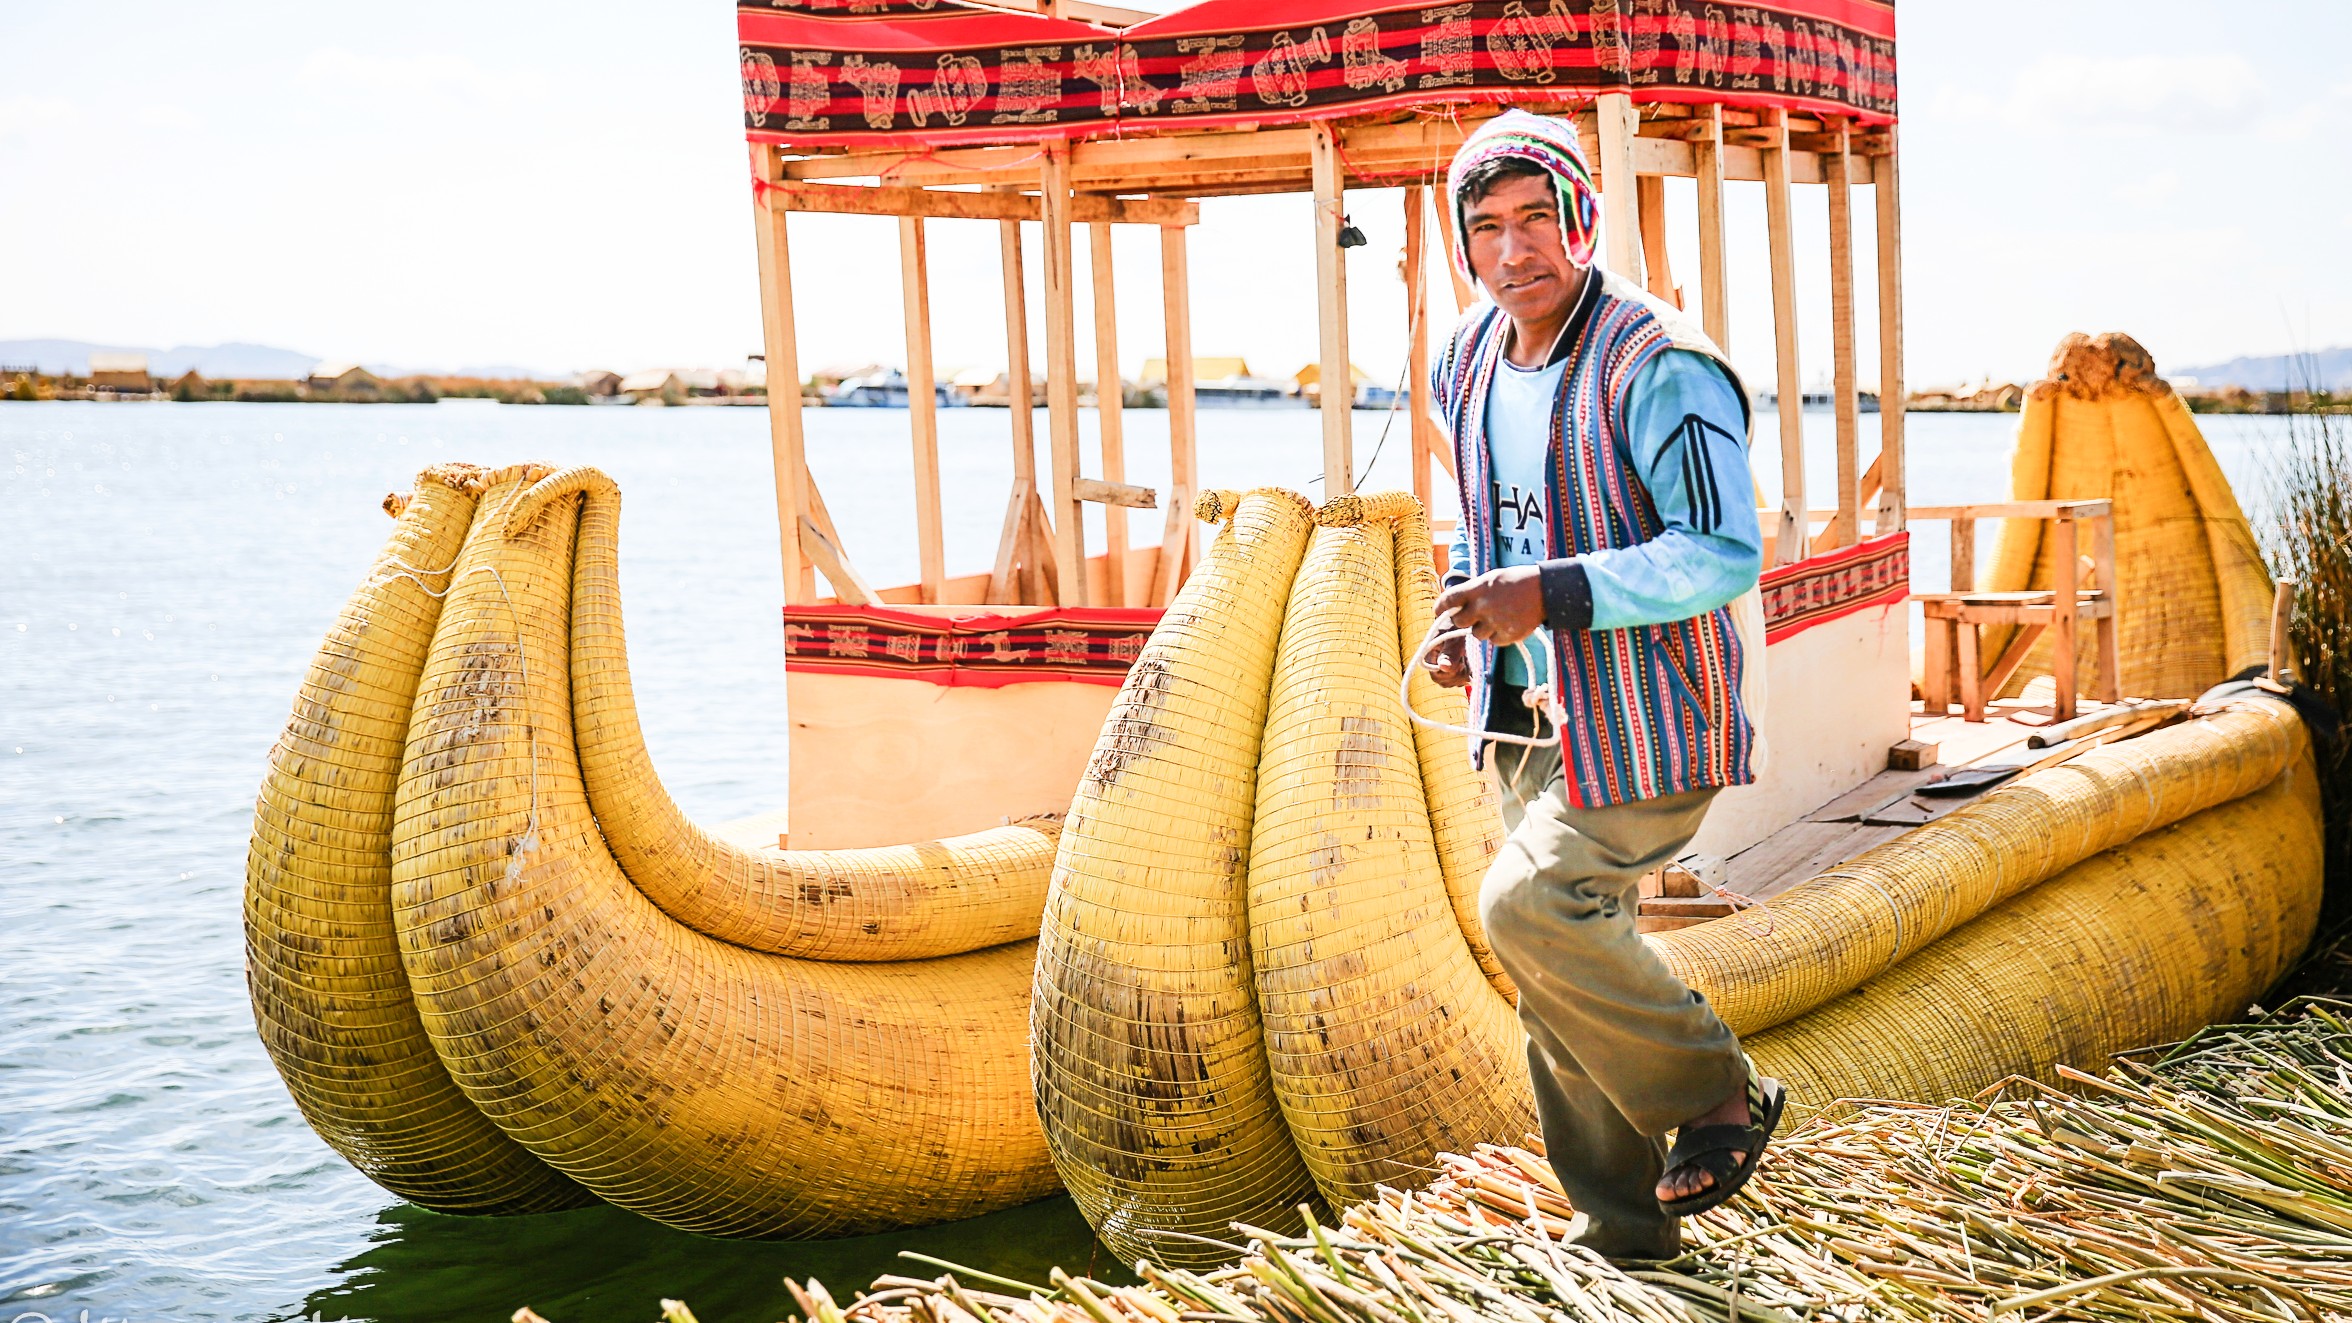 A man standing next to a boat made of bananas at Uros.